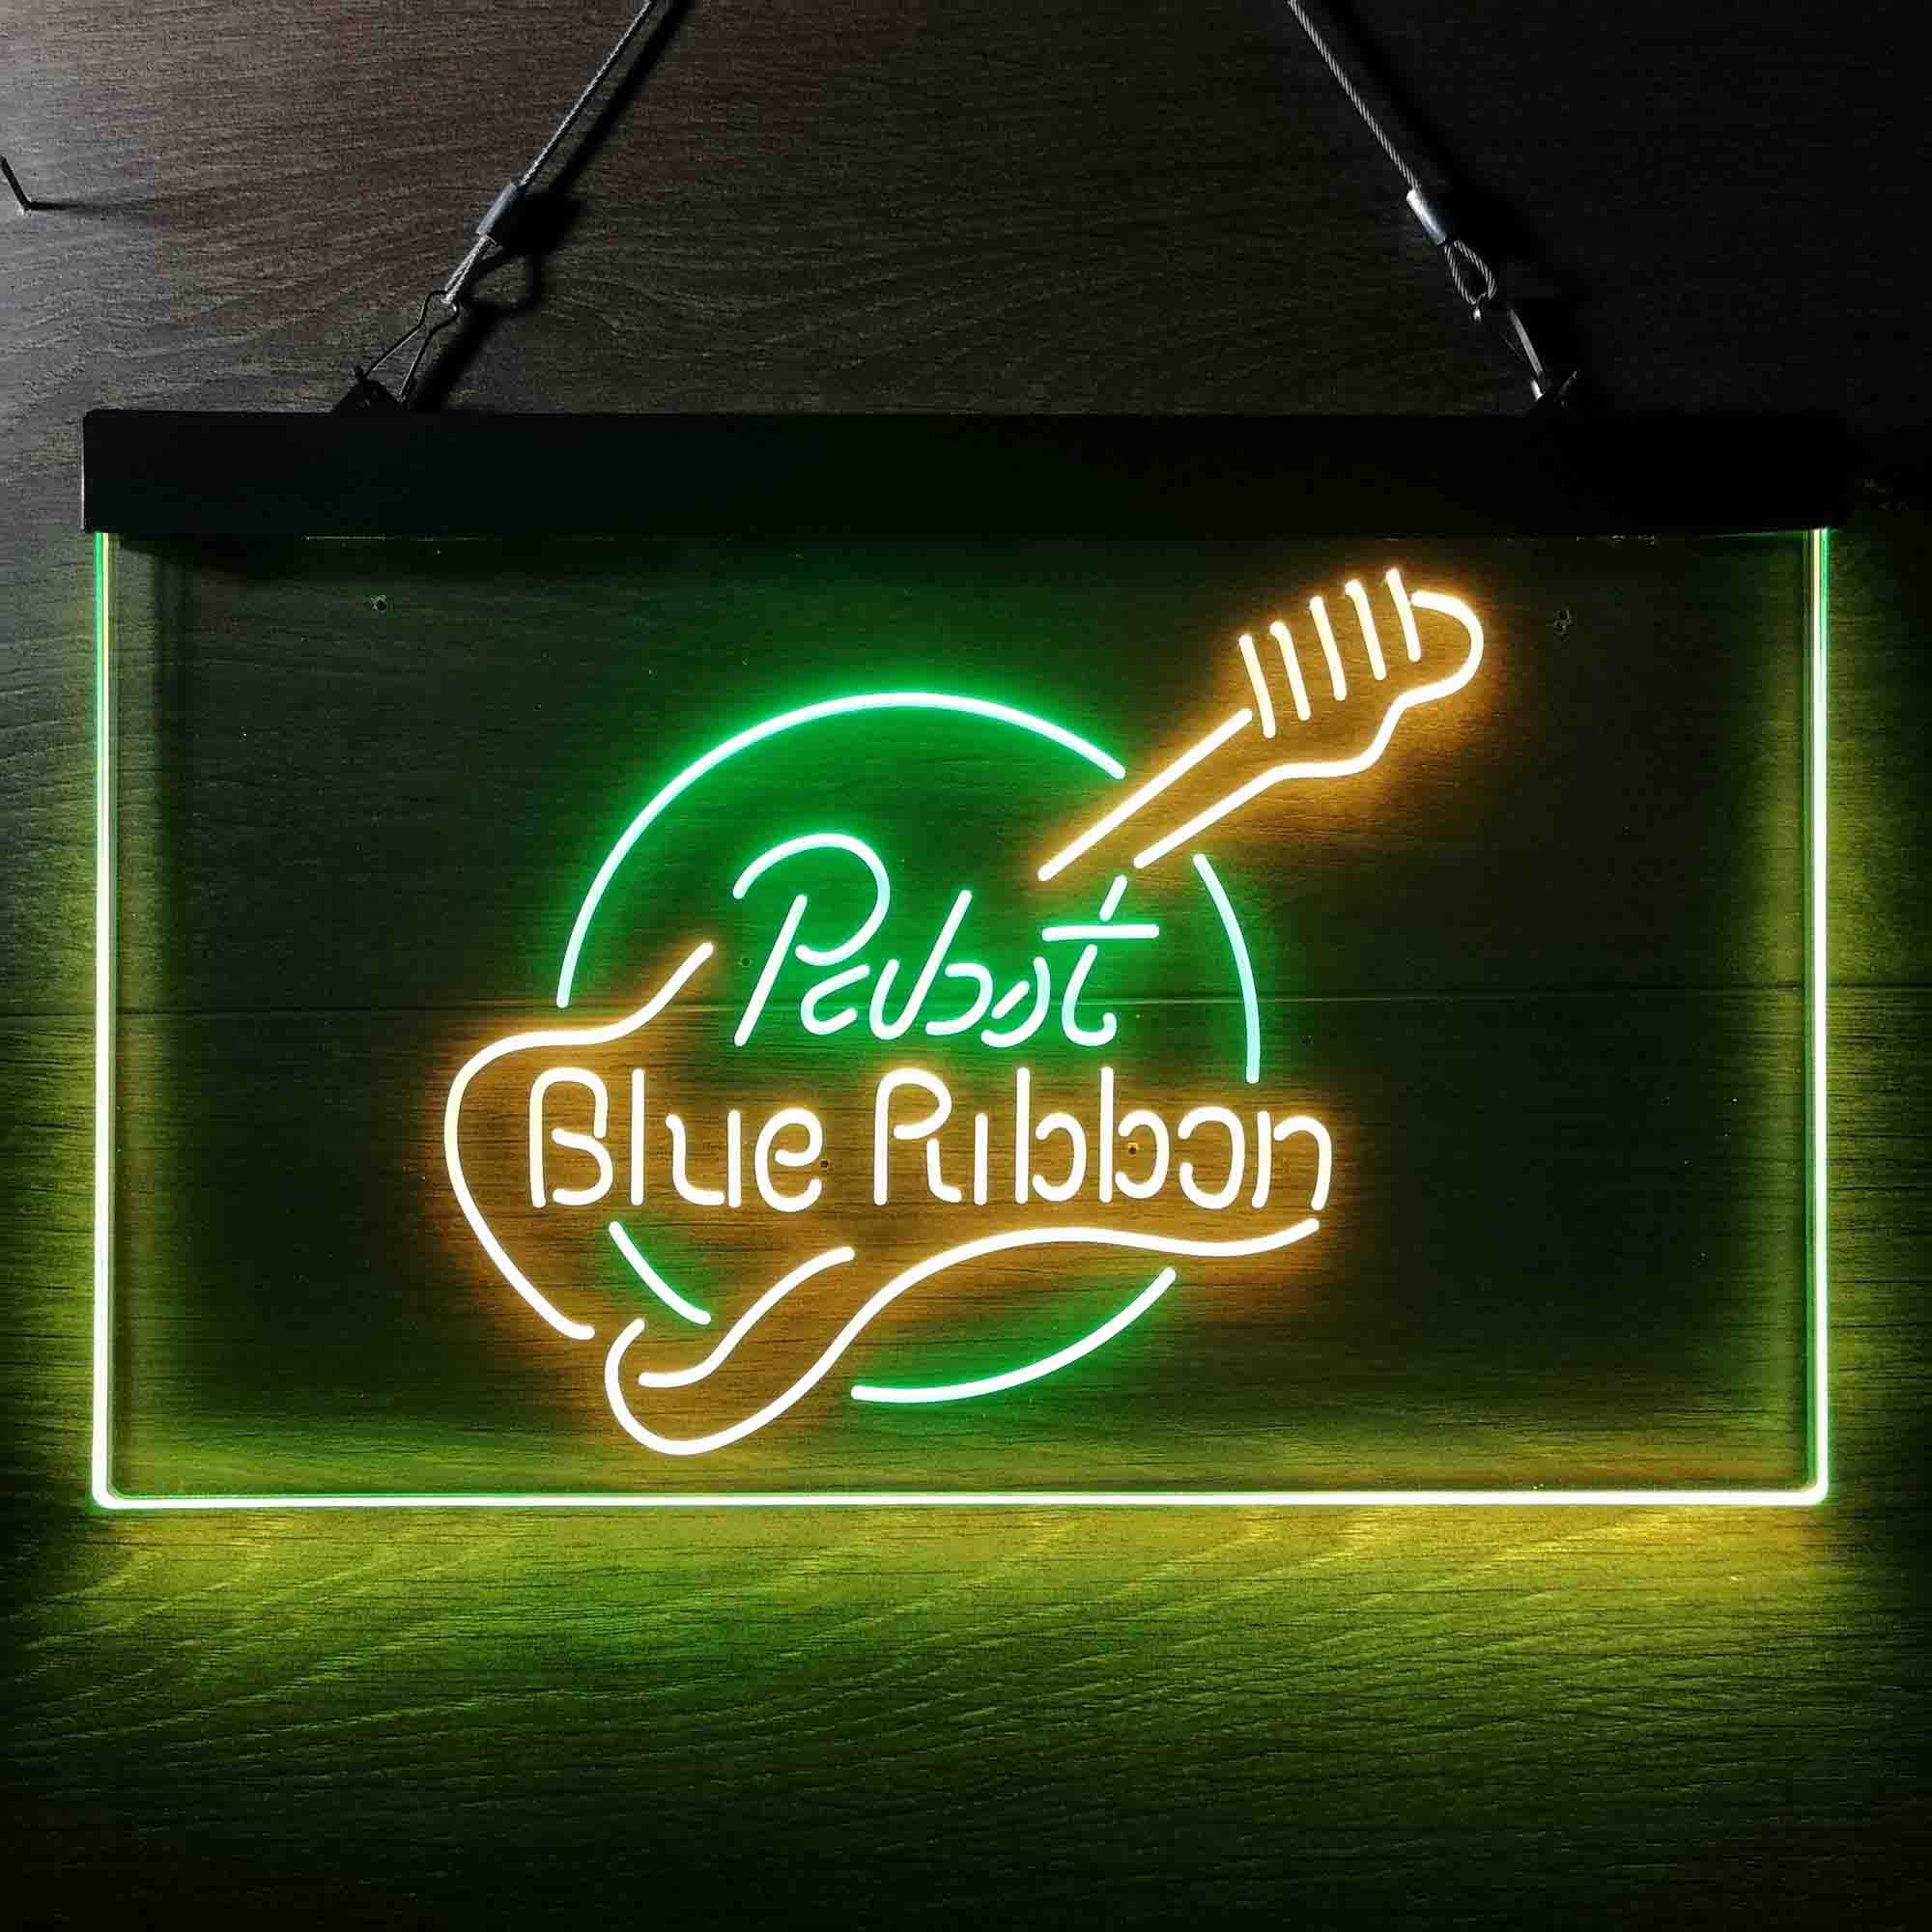 Pabst Blue Ribbon Guitar 2 Neon LED Sign